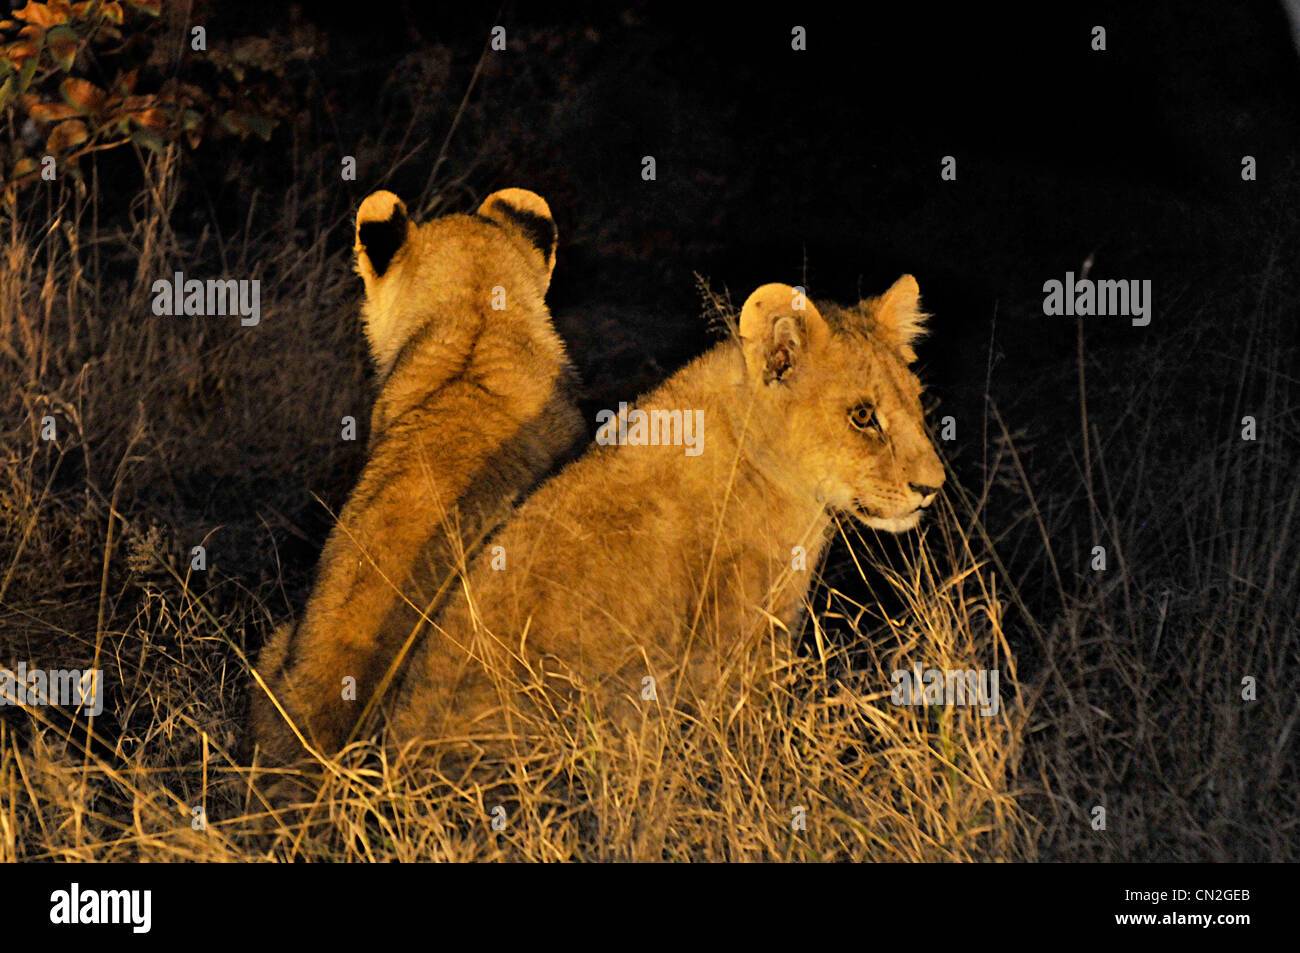 Lion cubs waiting for their mother to return from a hunt. Botswana, Africa. Stock Photo